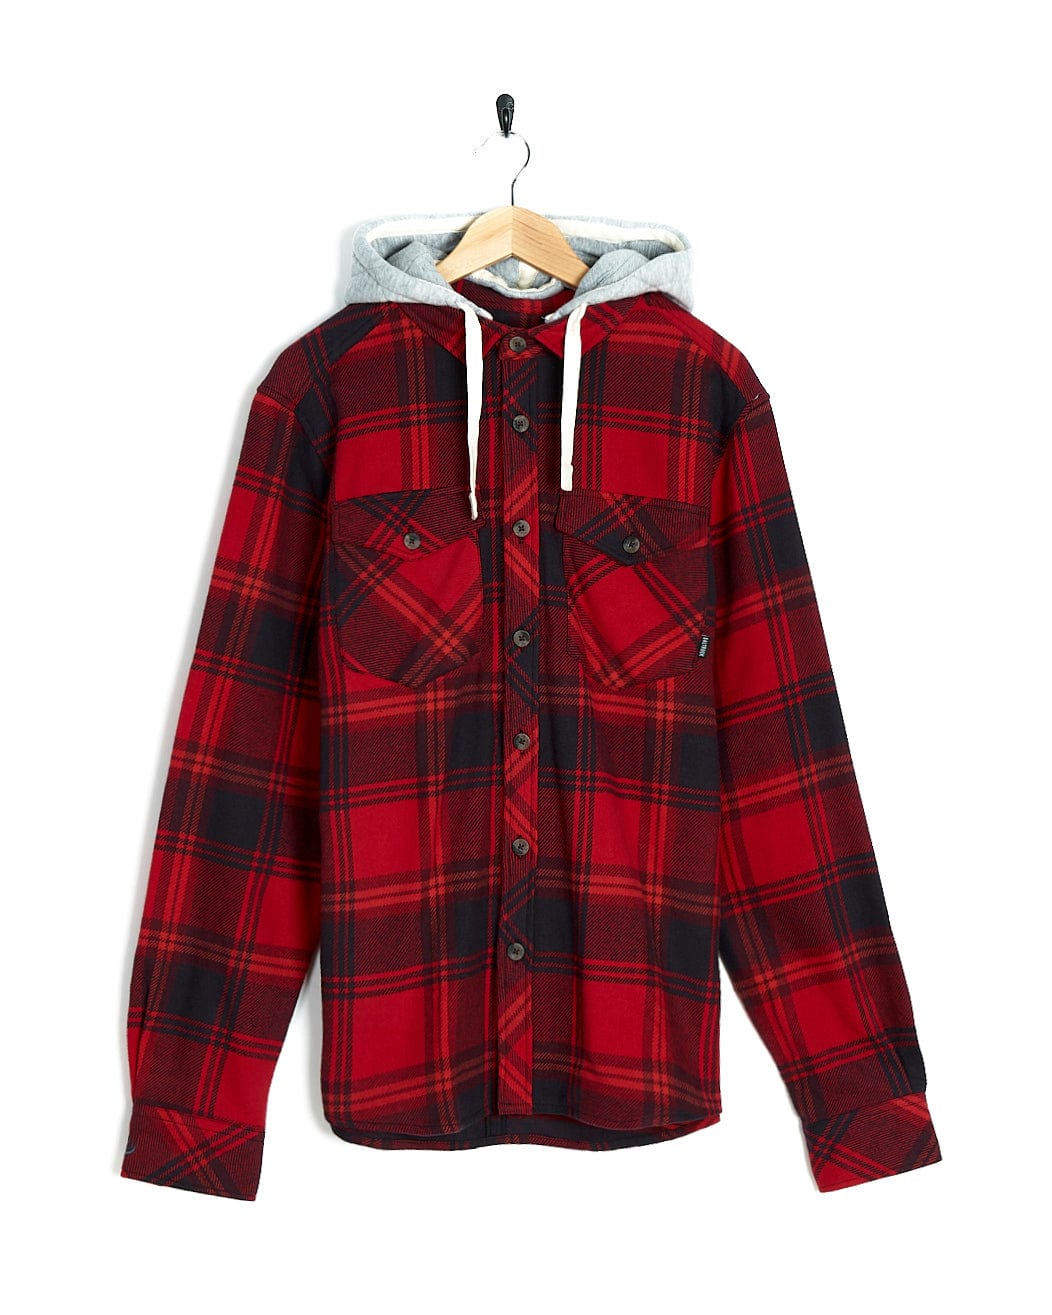 A Colter - Mens Hooded Shirt - Red hanging on a hanger.